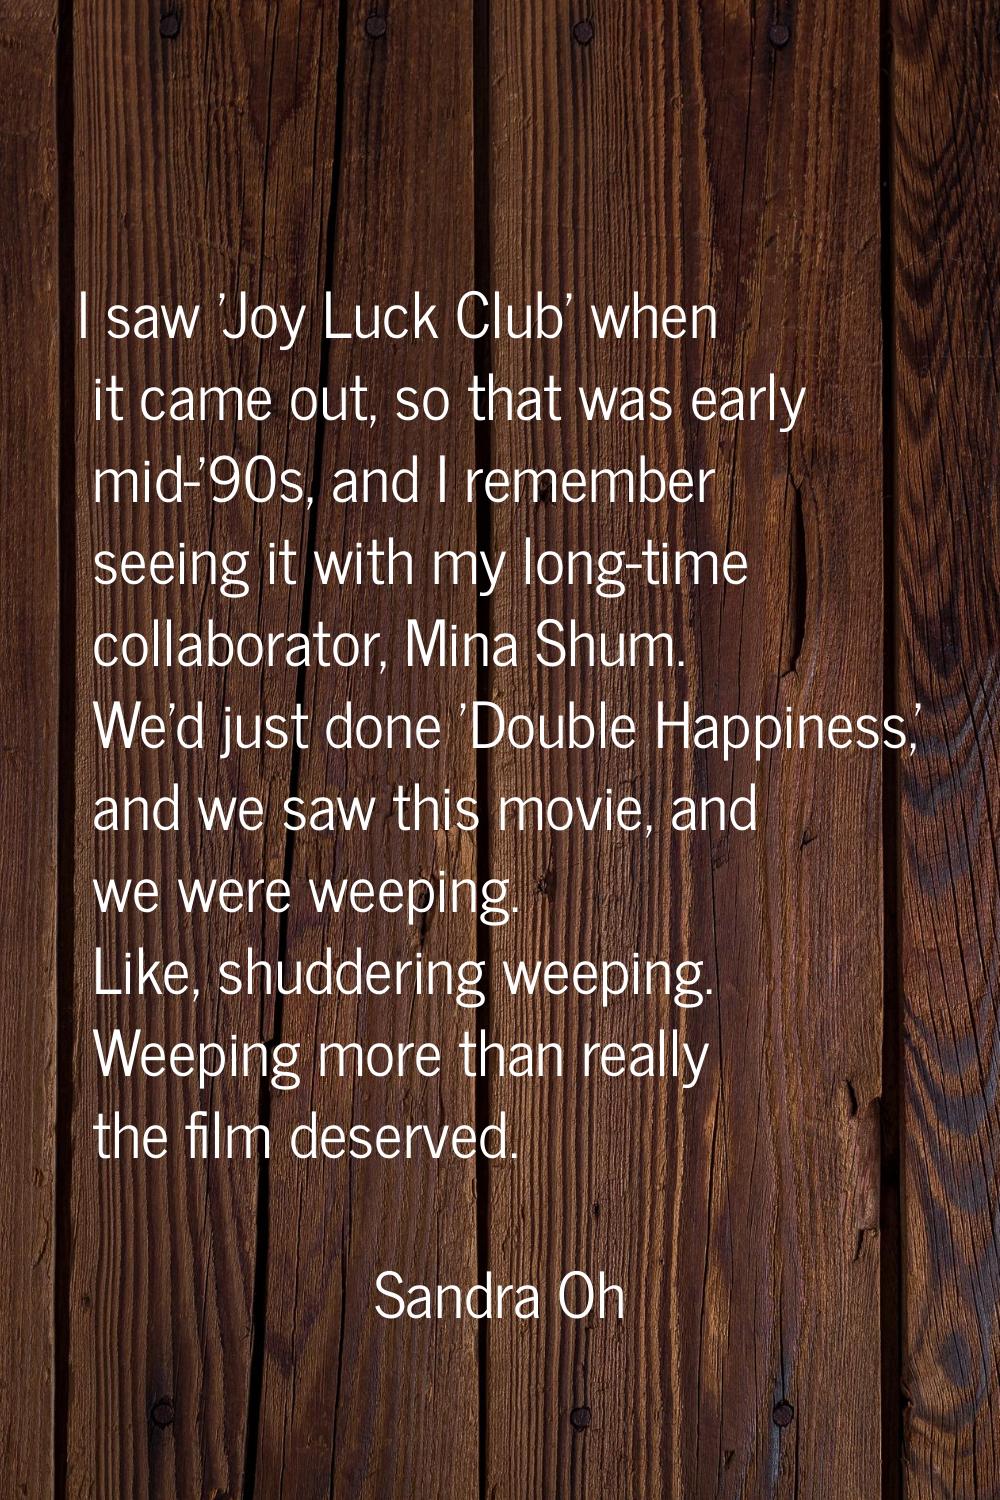 I saw 'Joy Luck Club' when it came out, so that was early mid-'90s, and I remember seeing it with m